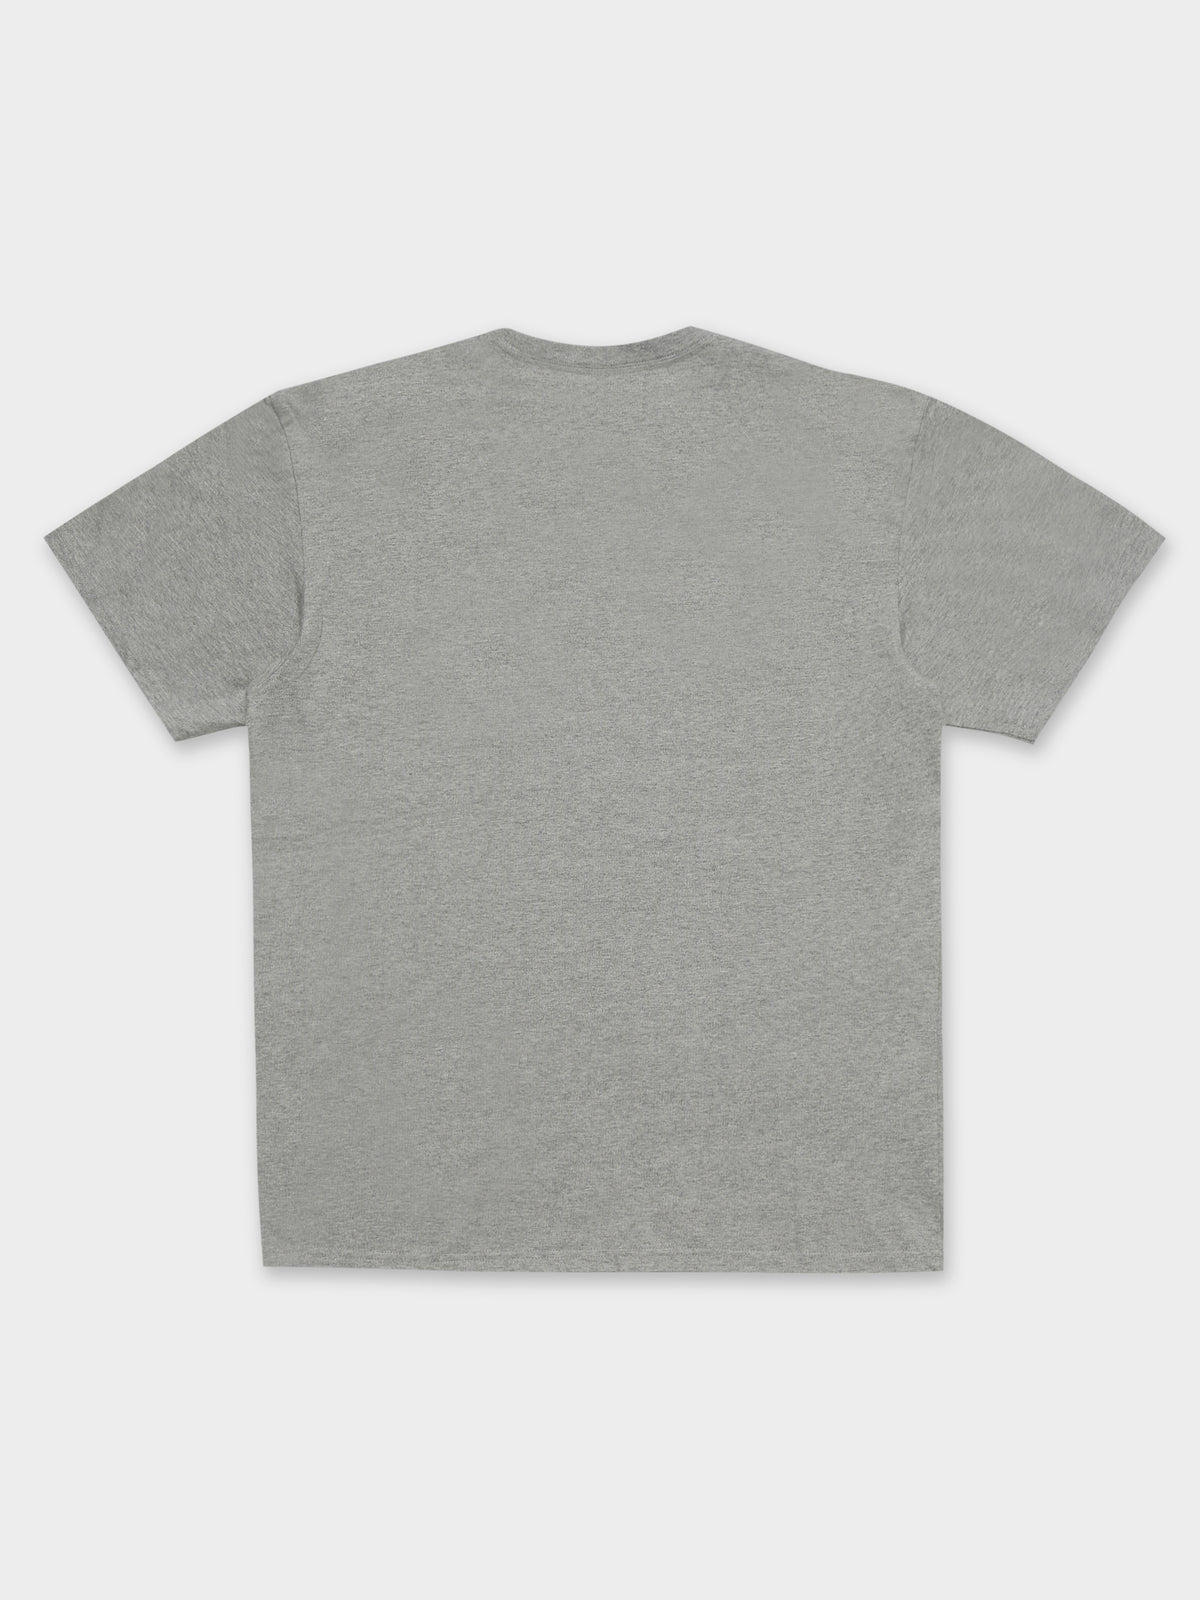 Chase T-Shirt in Grey